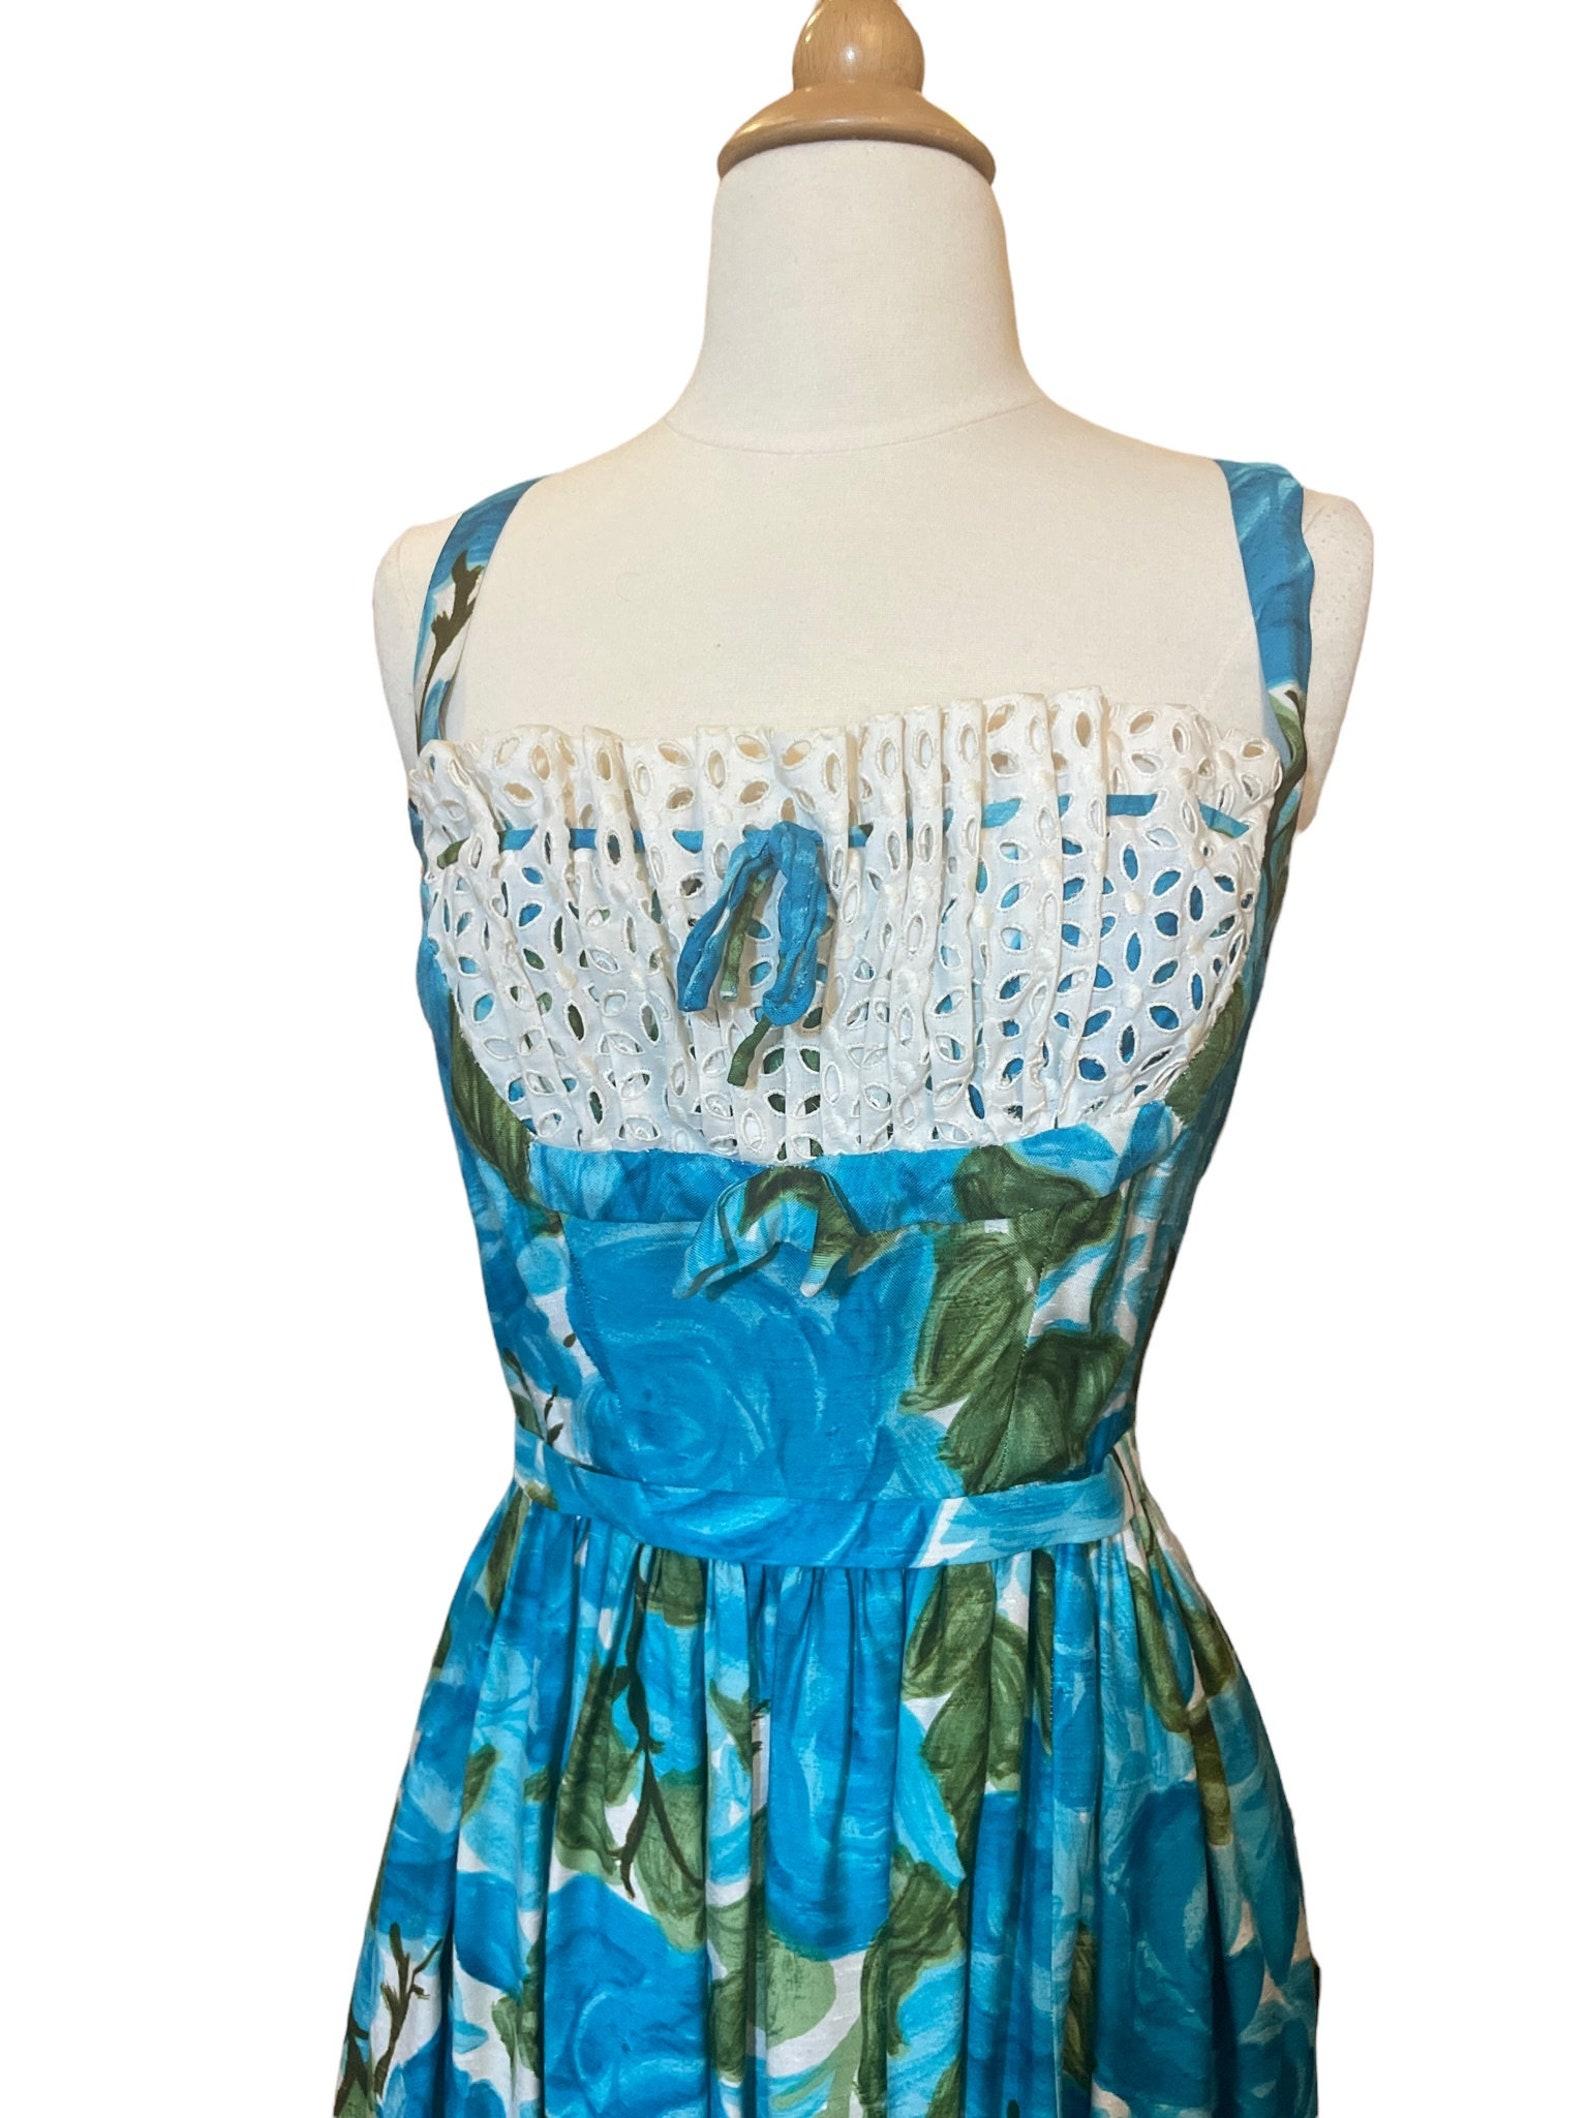 Blue and Green Watercolor Floral Sun Dress, Circa 1950s For Sale 1